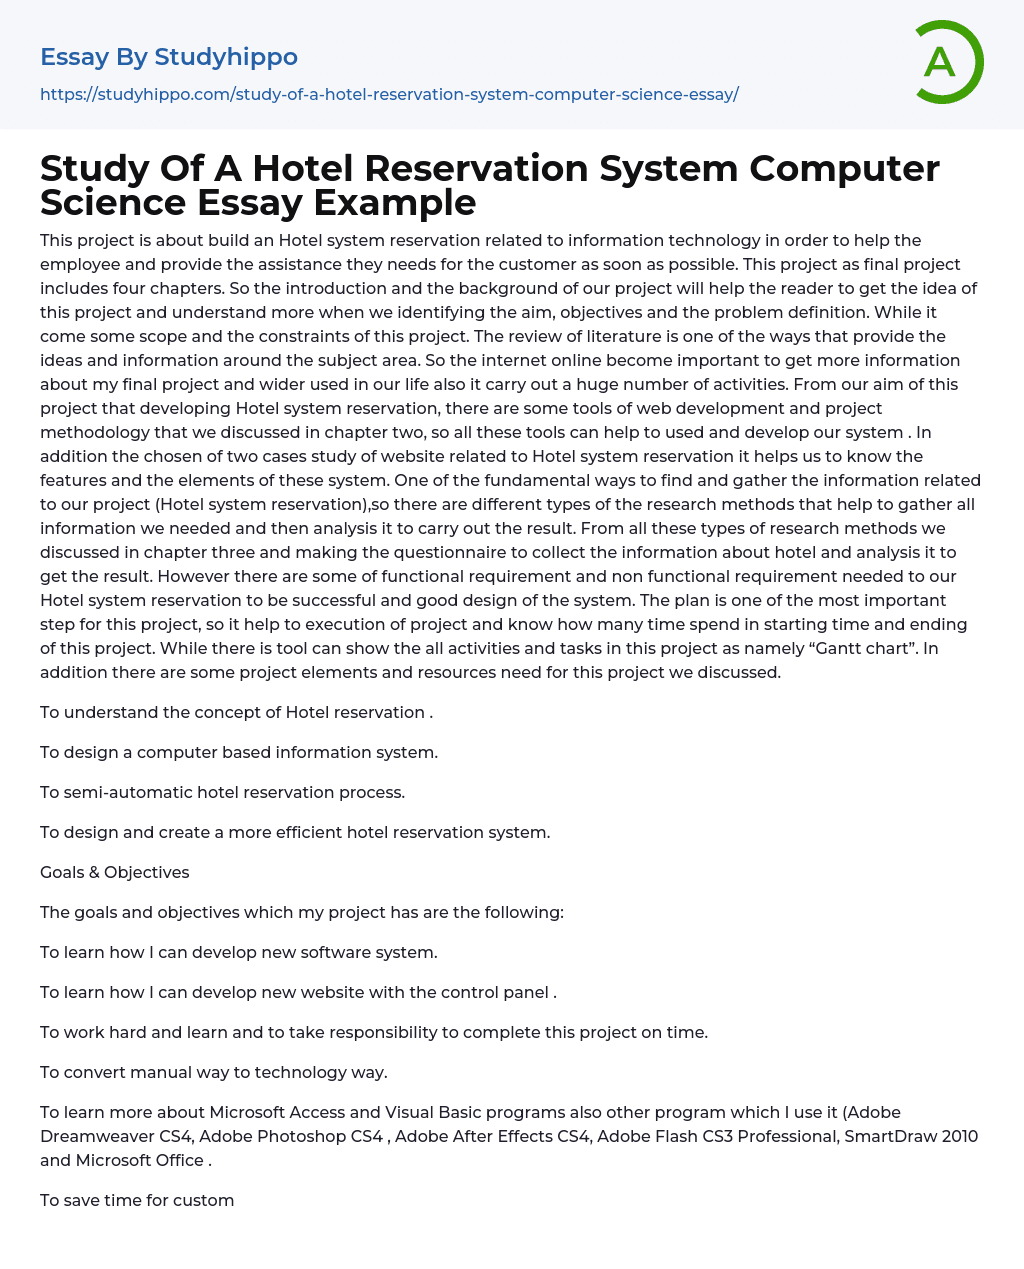 Study Of A Hotel Reservation System Computer Science Essay Example